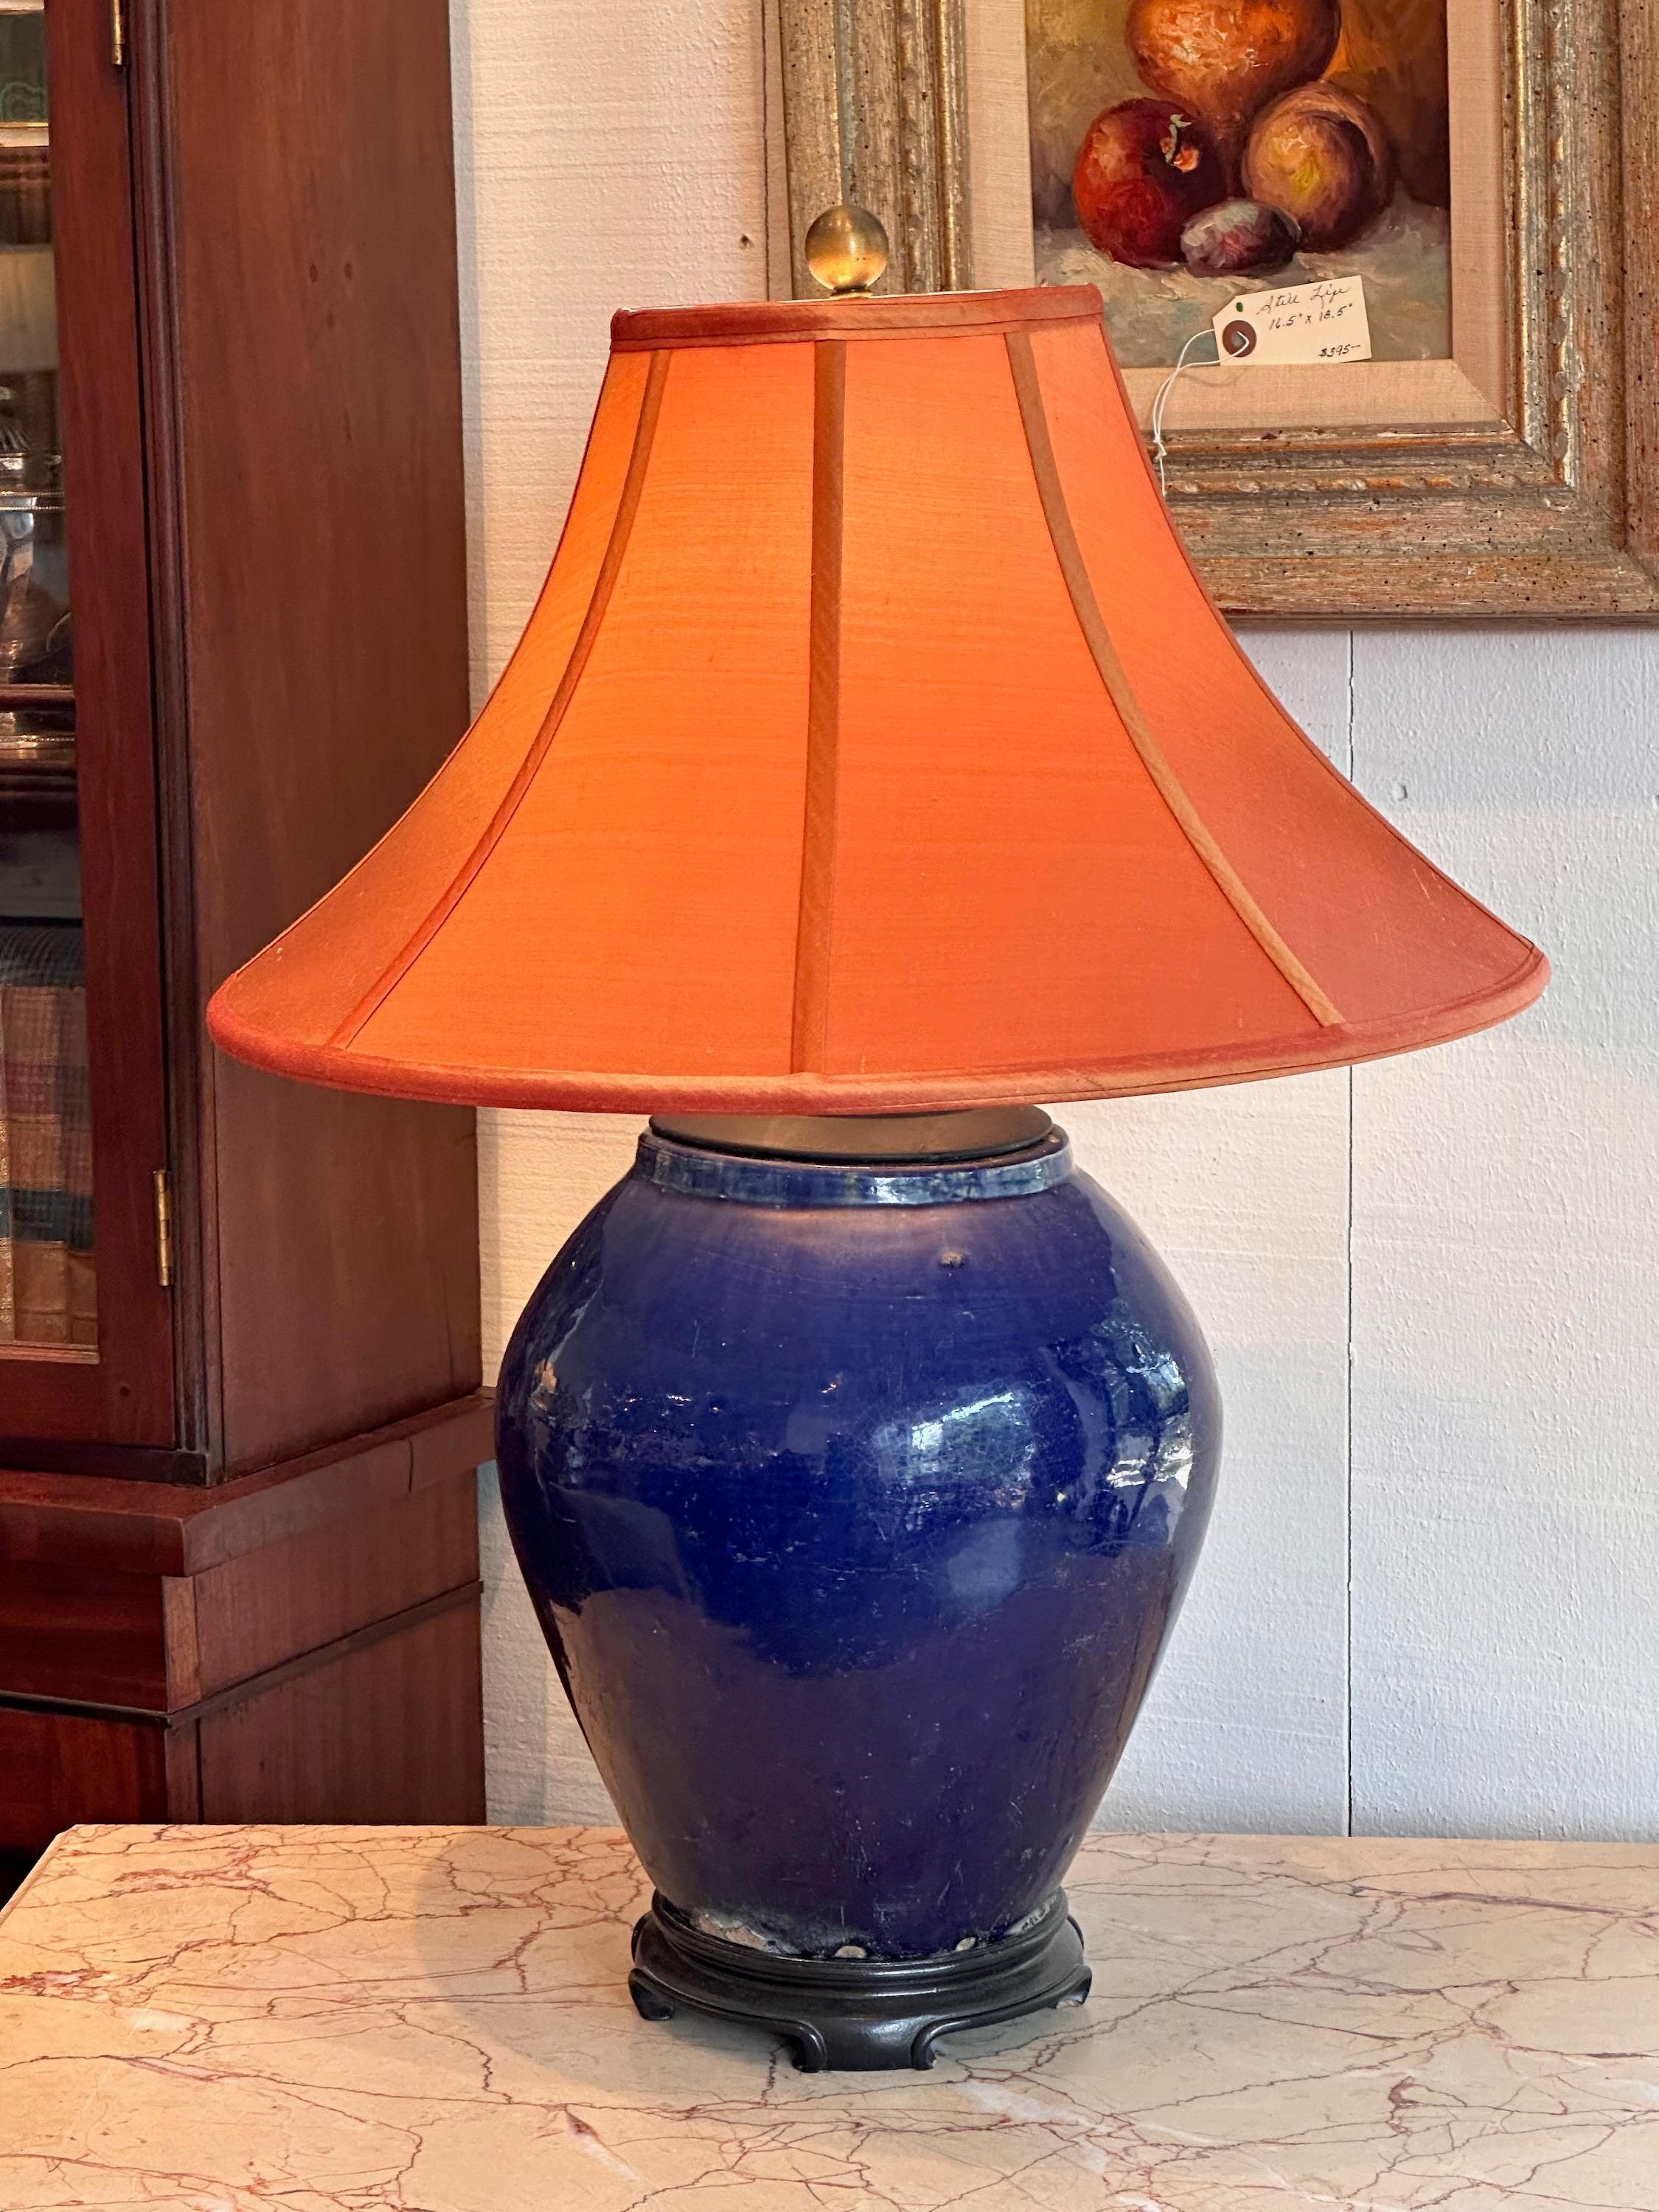 Simple shape. Nice blue color. Made in the Mid 20th Century